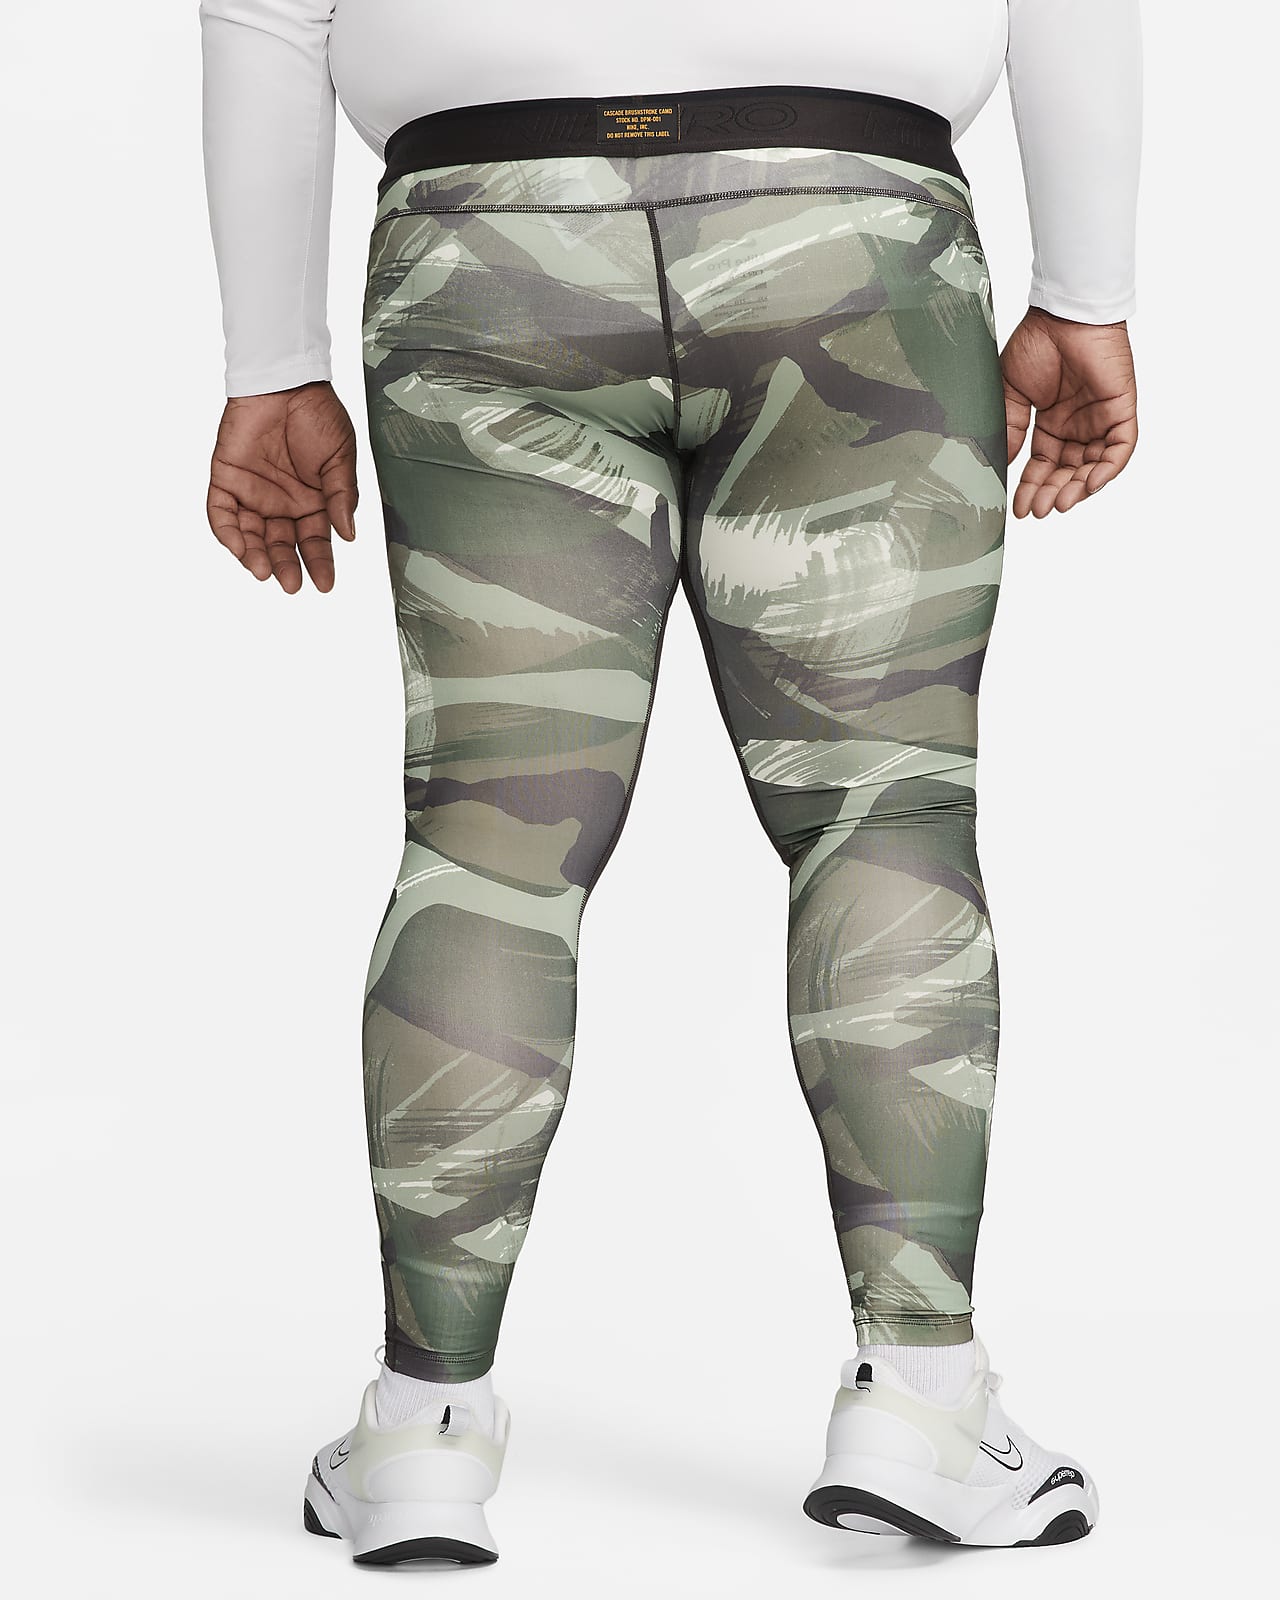 Misvisende Mary Og hold Nike Pro Dri-FIT Men's Camo Tights. Nike.com